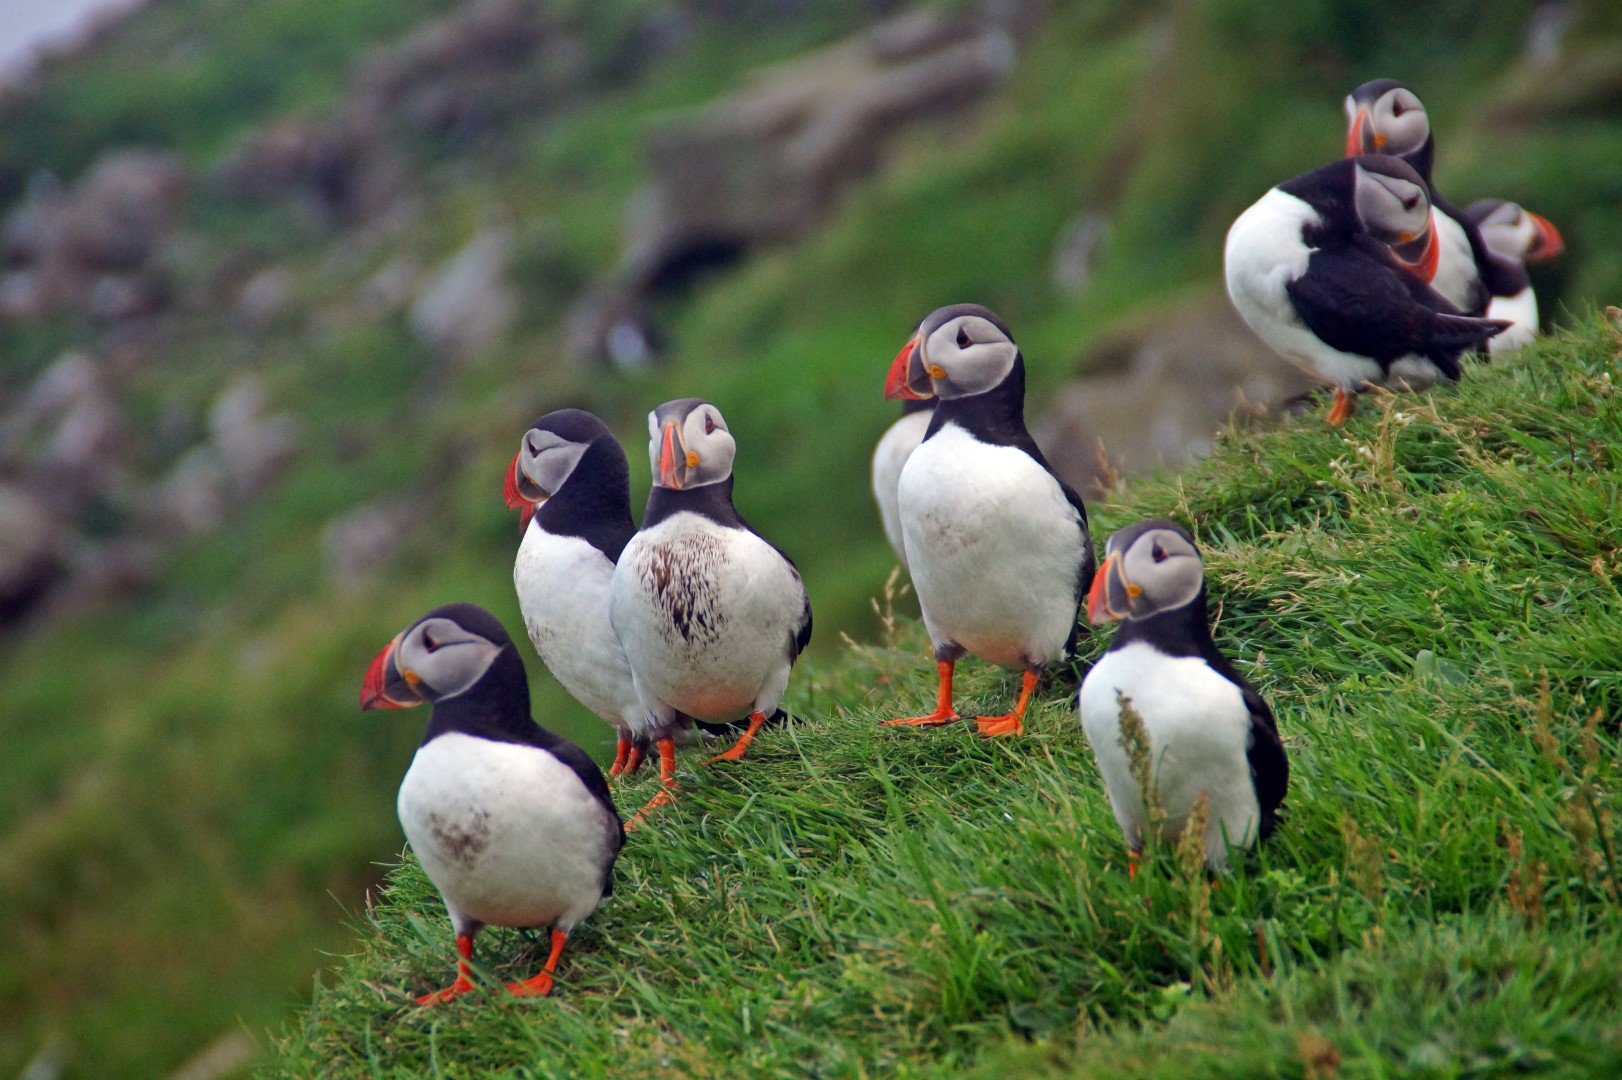 Adorable puffins that I can understand her wanting to study, although not for 3 hours straight.